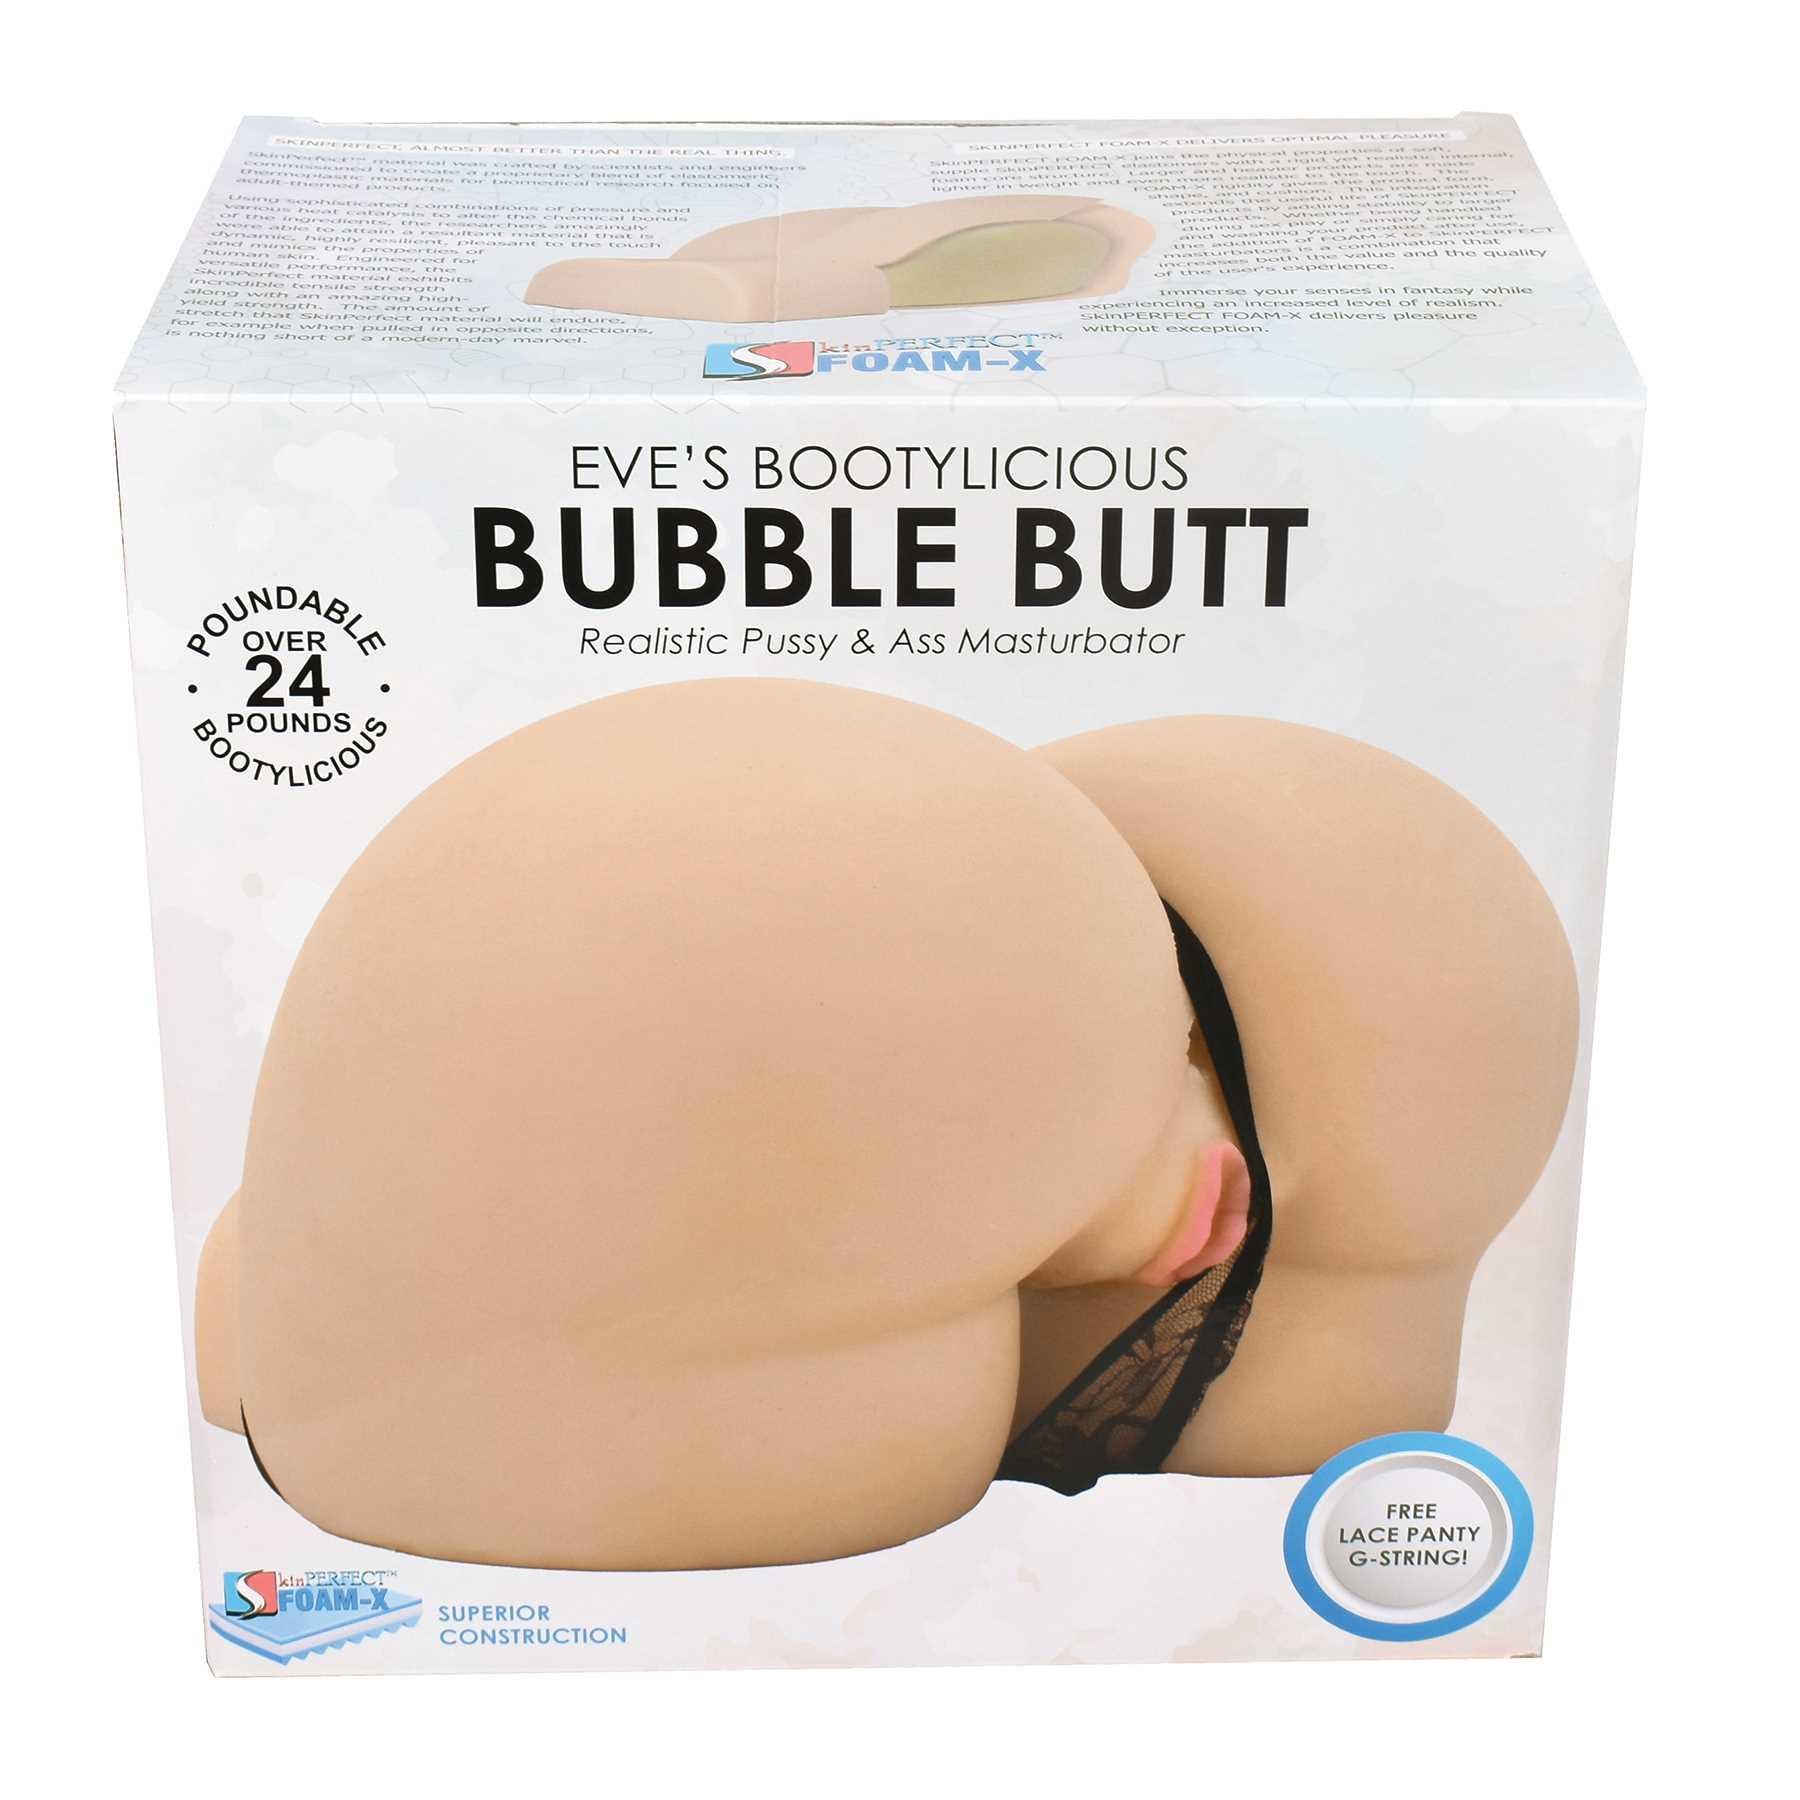 Eve's Bootylicious Bubble Butt box packaging